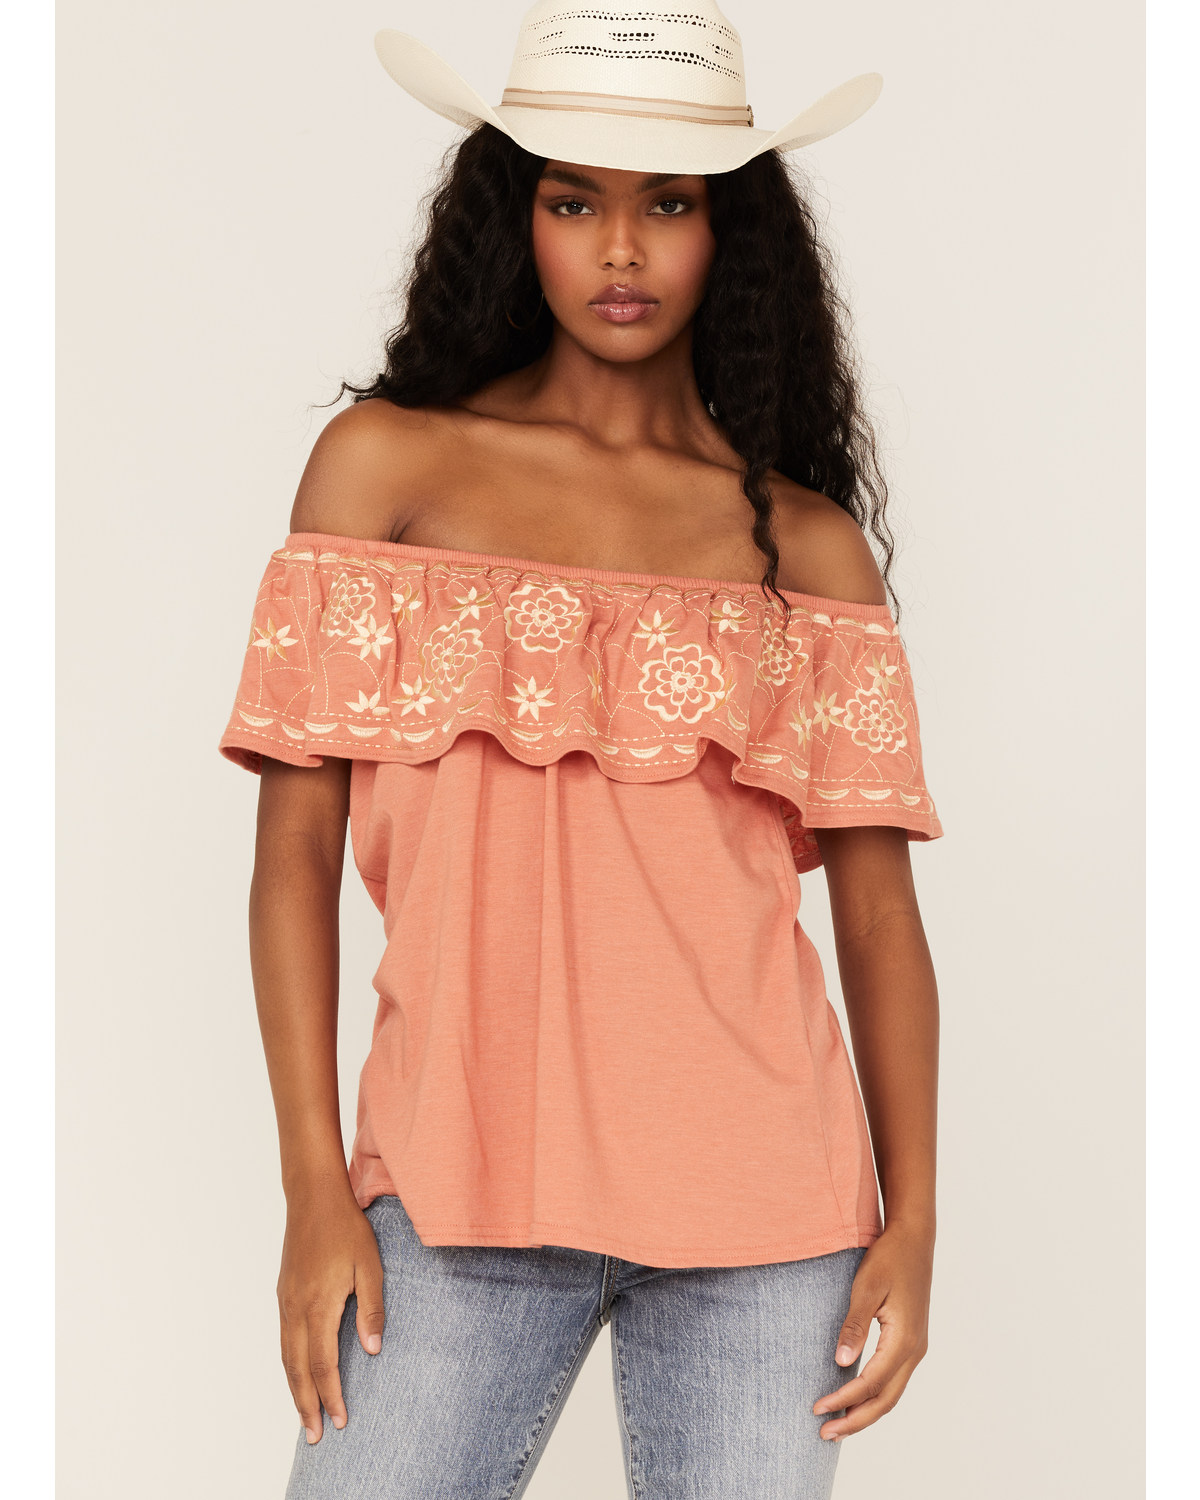 Panhandle Women's Embroidered Flounce Off Shoulder Top